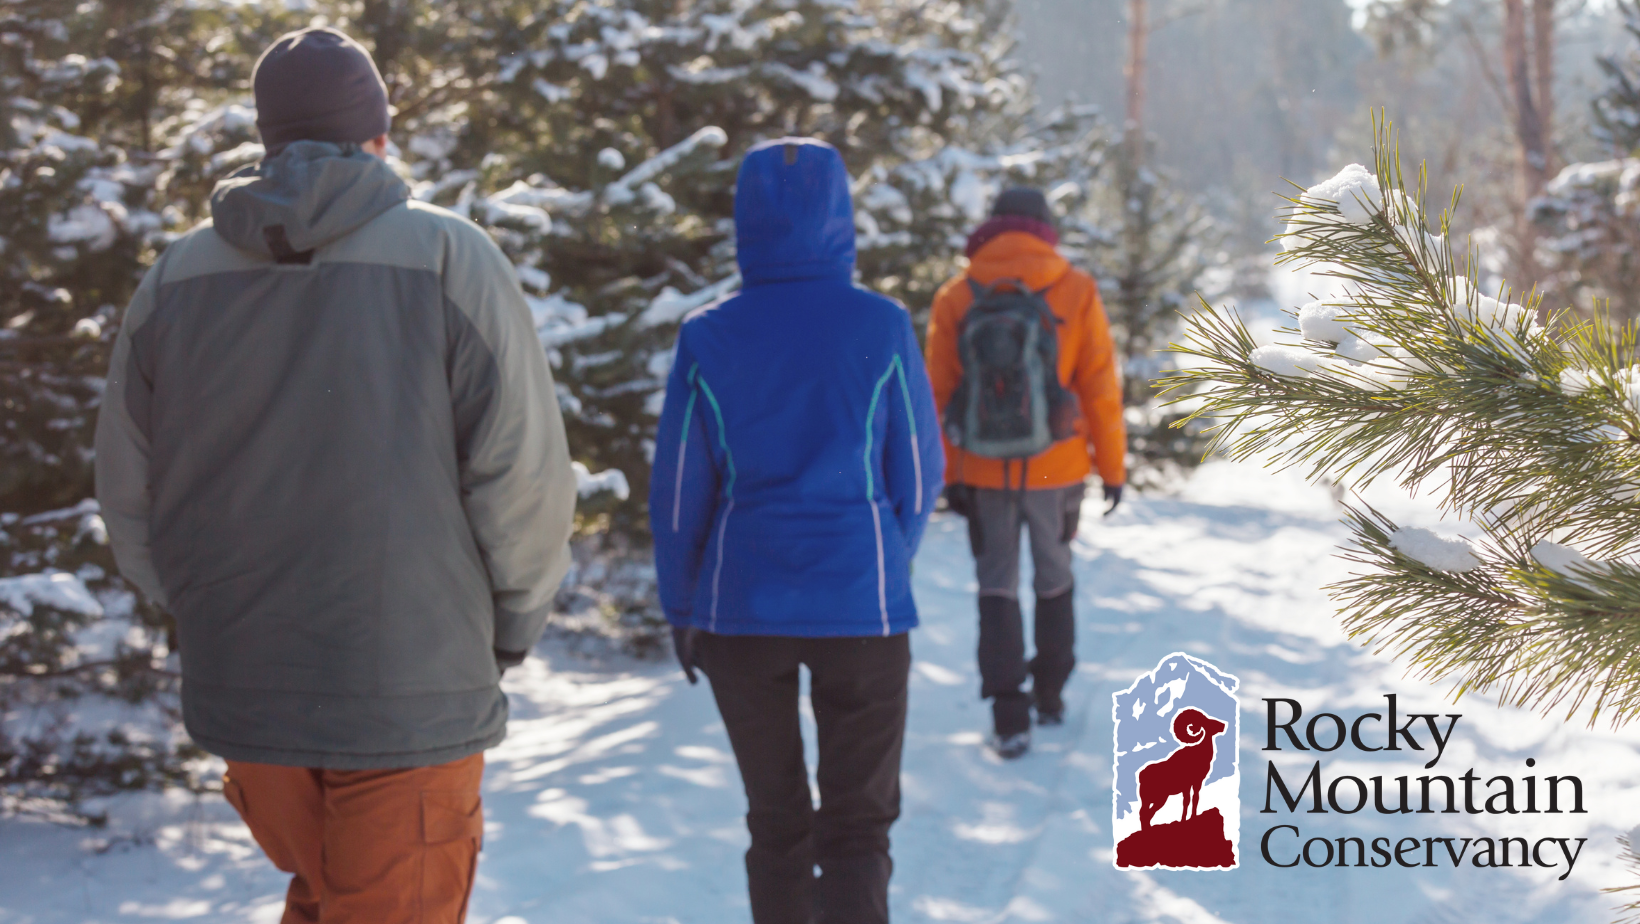 Rocky mountain cc logo with people walking in the snow.